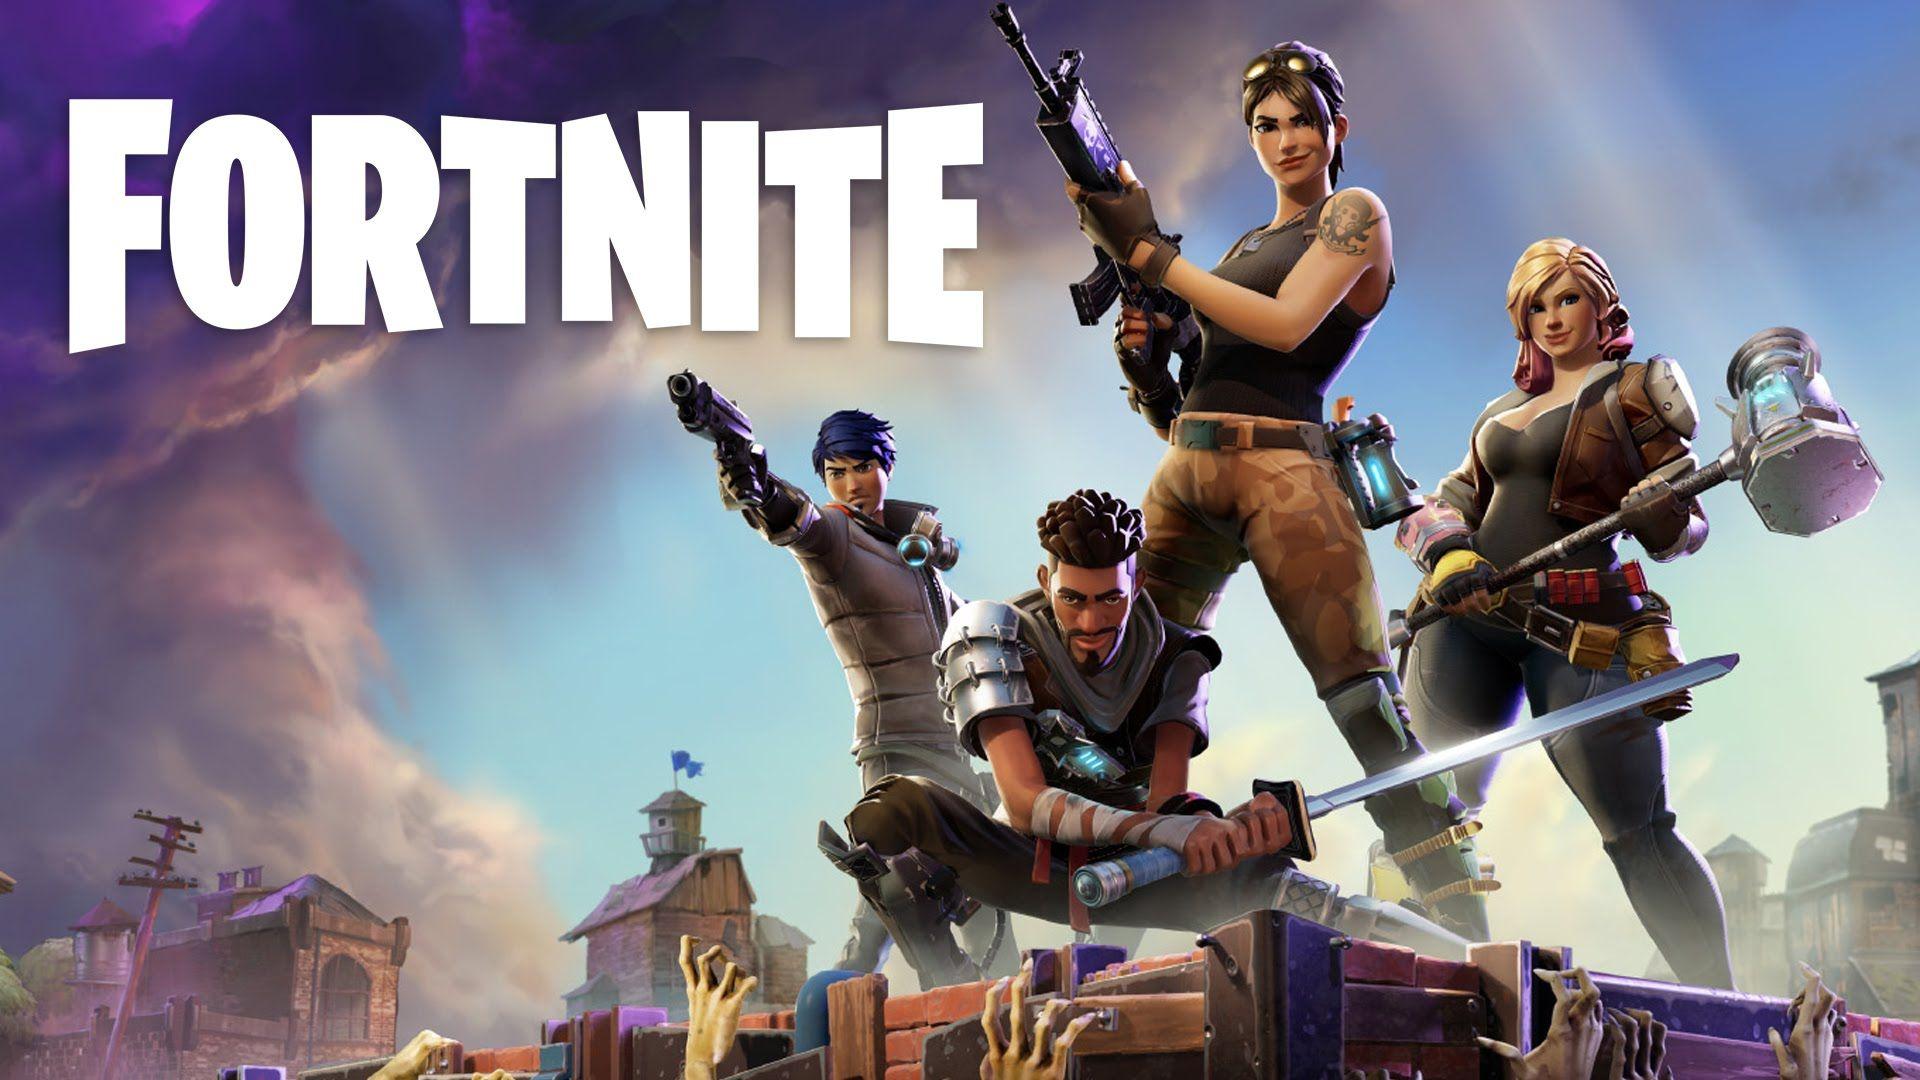 Fortnite's New Battle Royale Mode Is Now Free On Consoles And PC